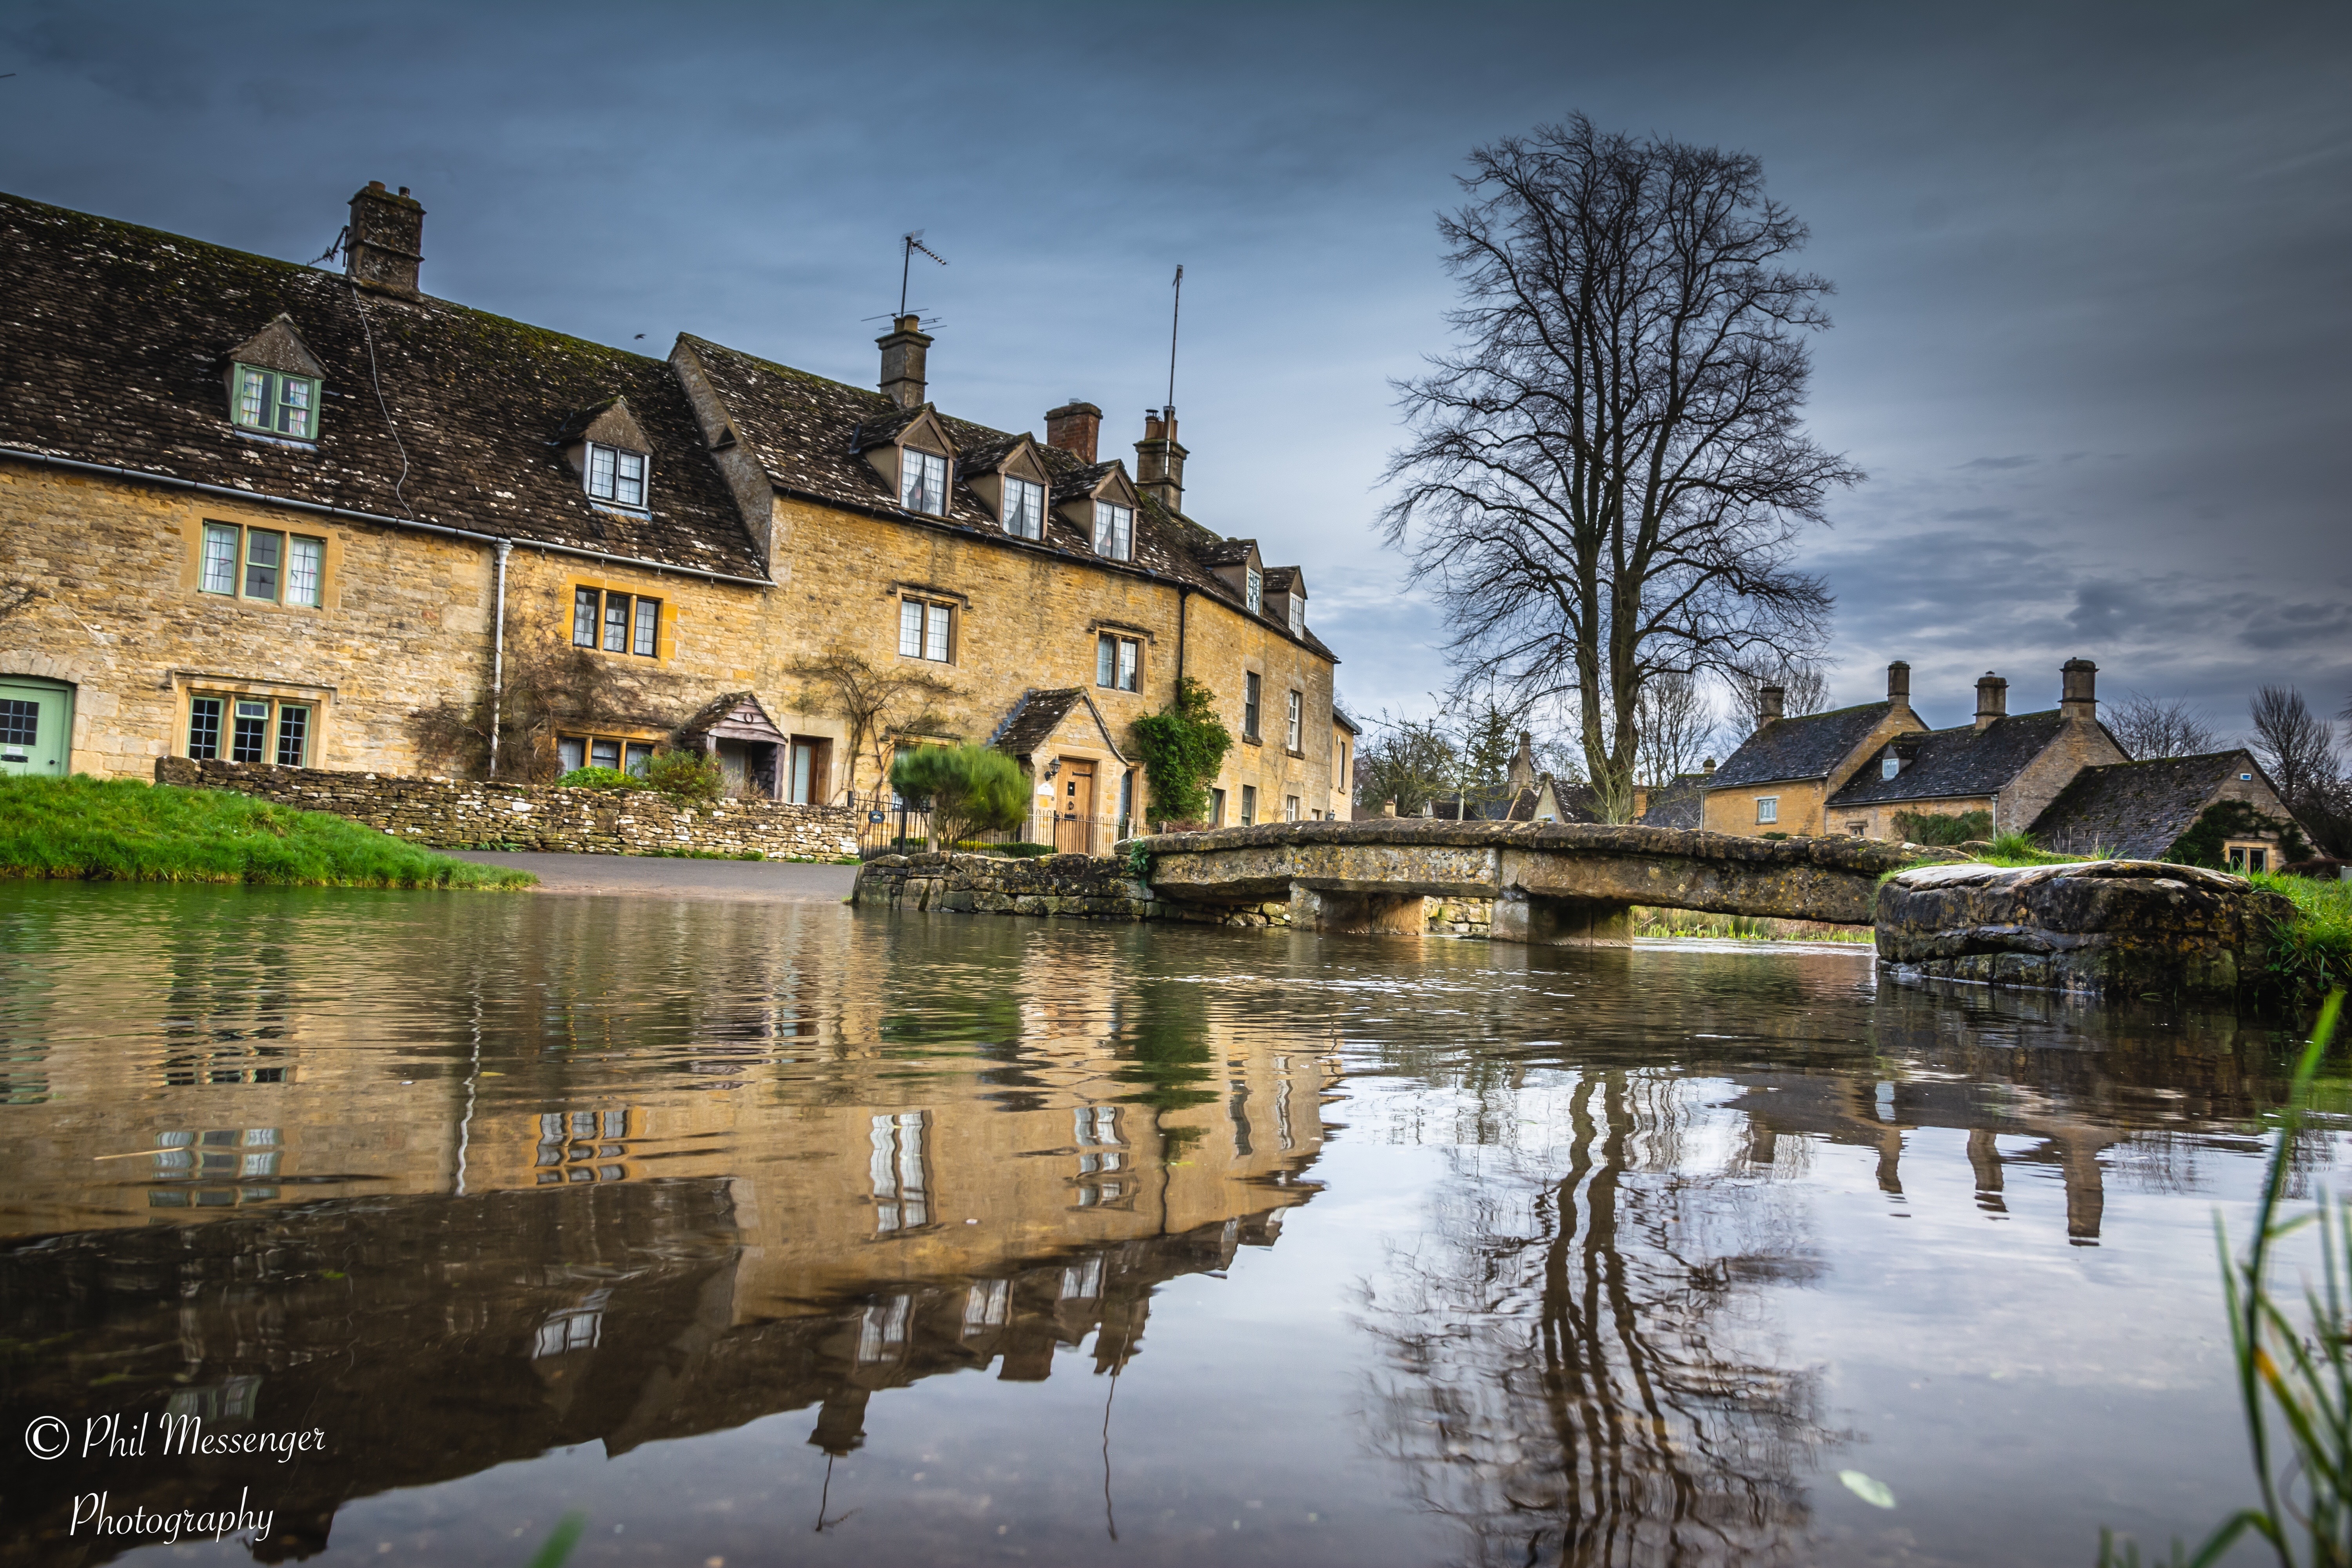 Riverside cottages reflecting on the river eye at Lower Slaughter in the Cotswolds.